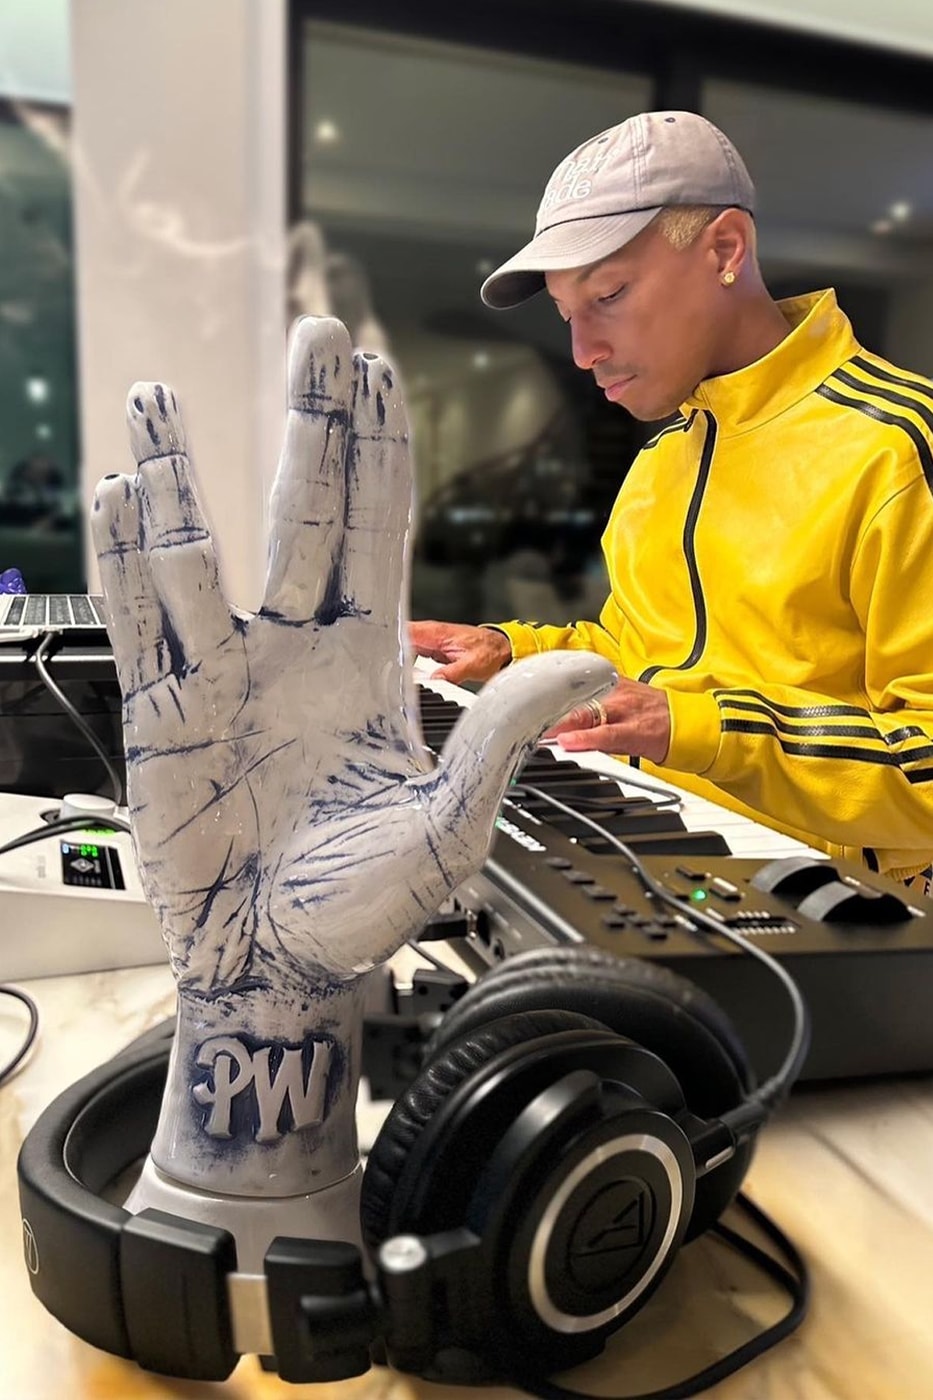 NEIGHBORHOOD Taps Pharrell Williams for Vulcan Salute Incense Holder collaboration Incense Chamber ceramic PW white blue release info date price